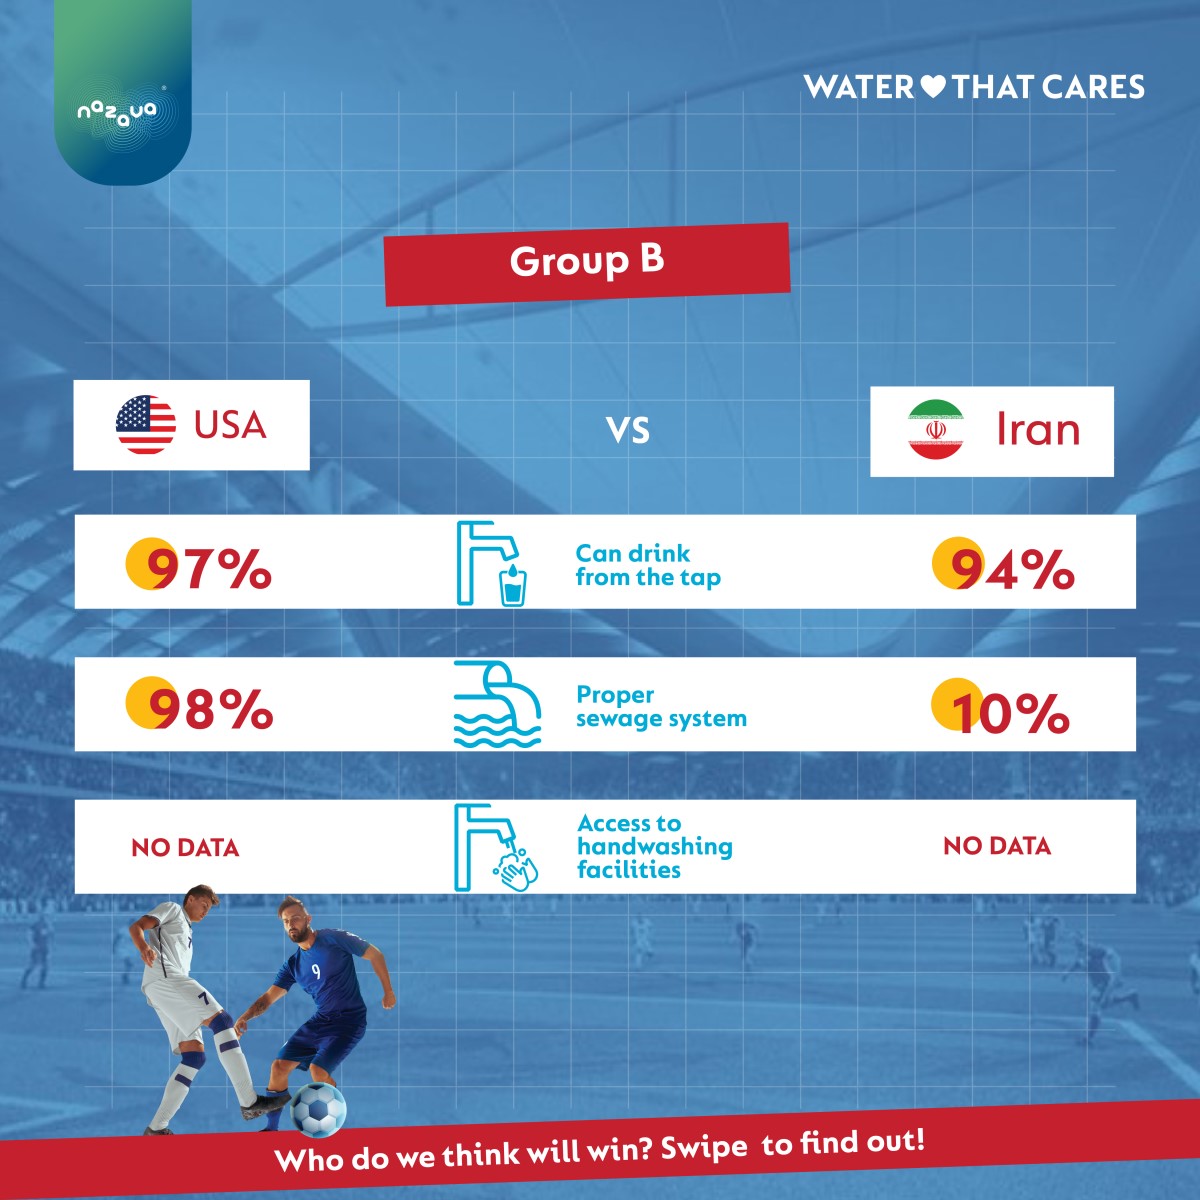 USA vs Iran head to head on access to water and sanitation